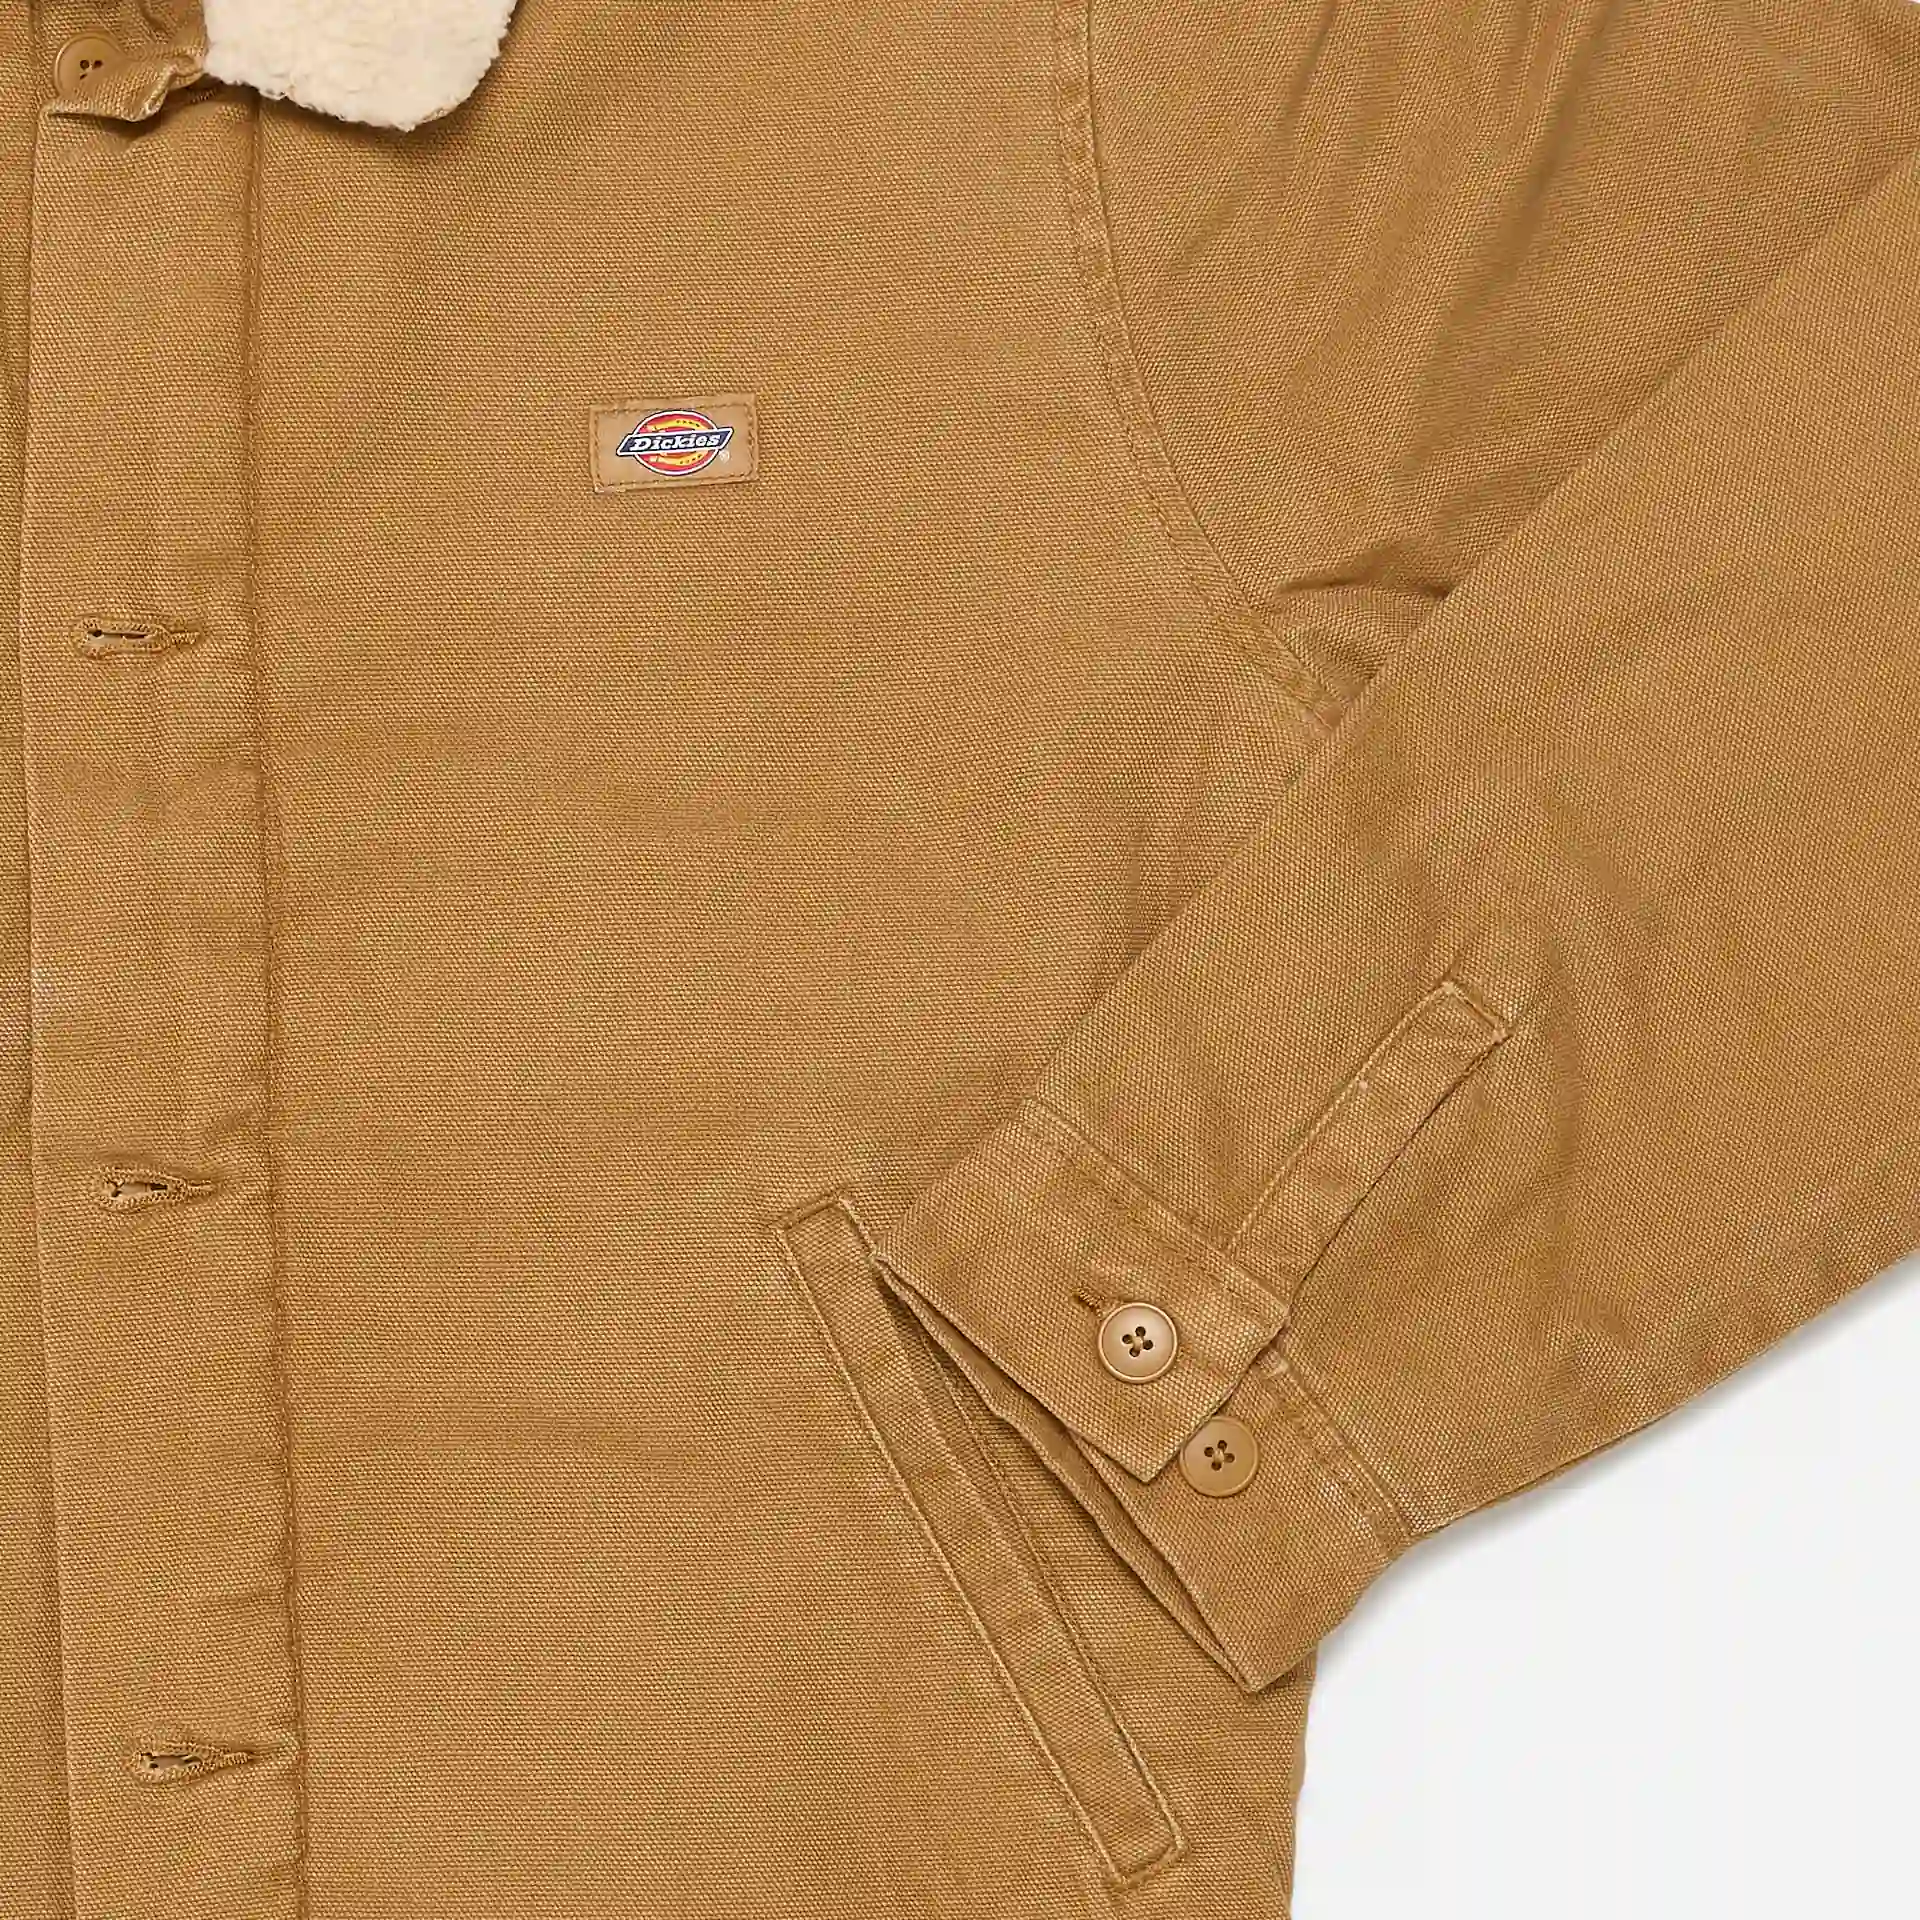 Dickies Duck Canvas Jackt Stone Washed Brown/Duck